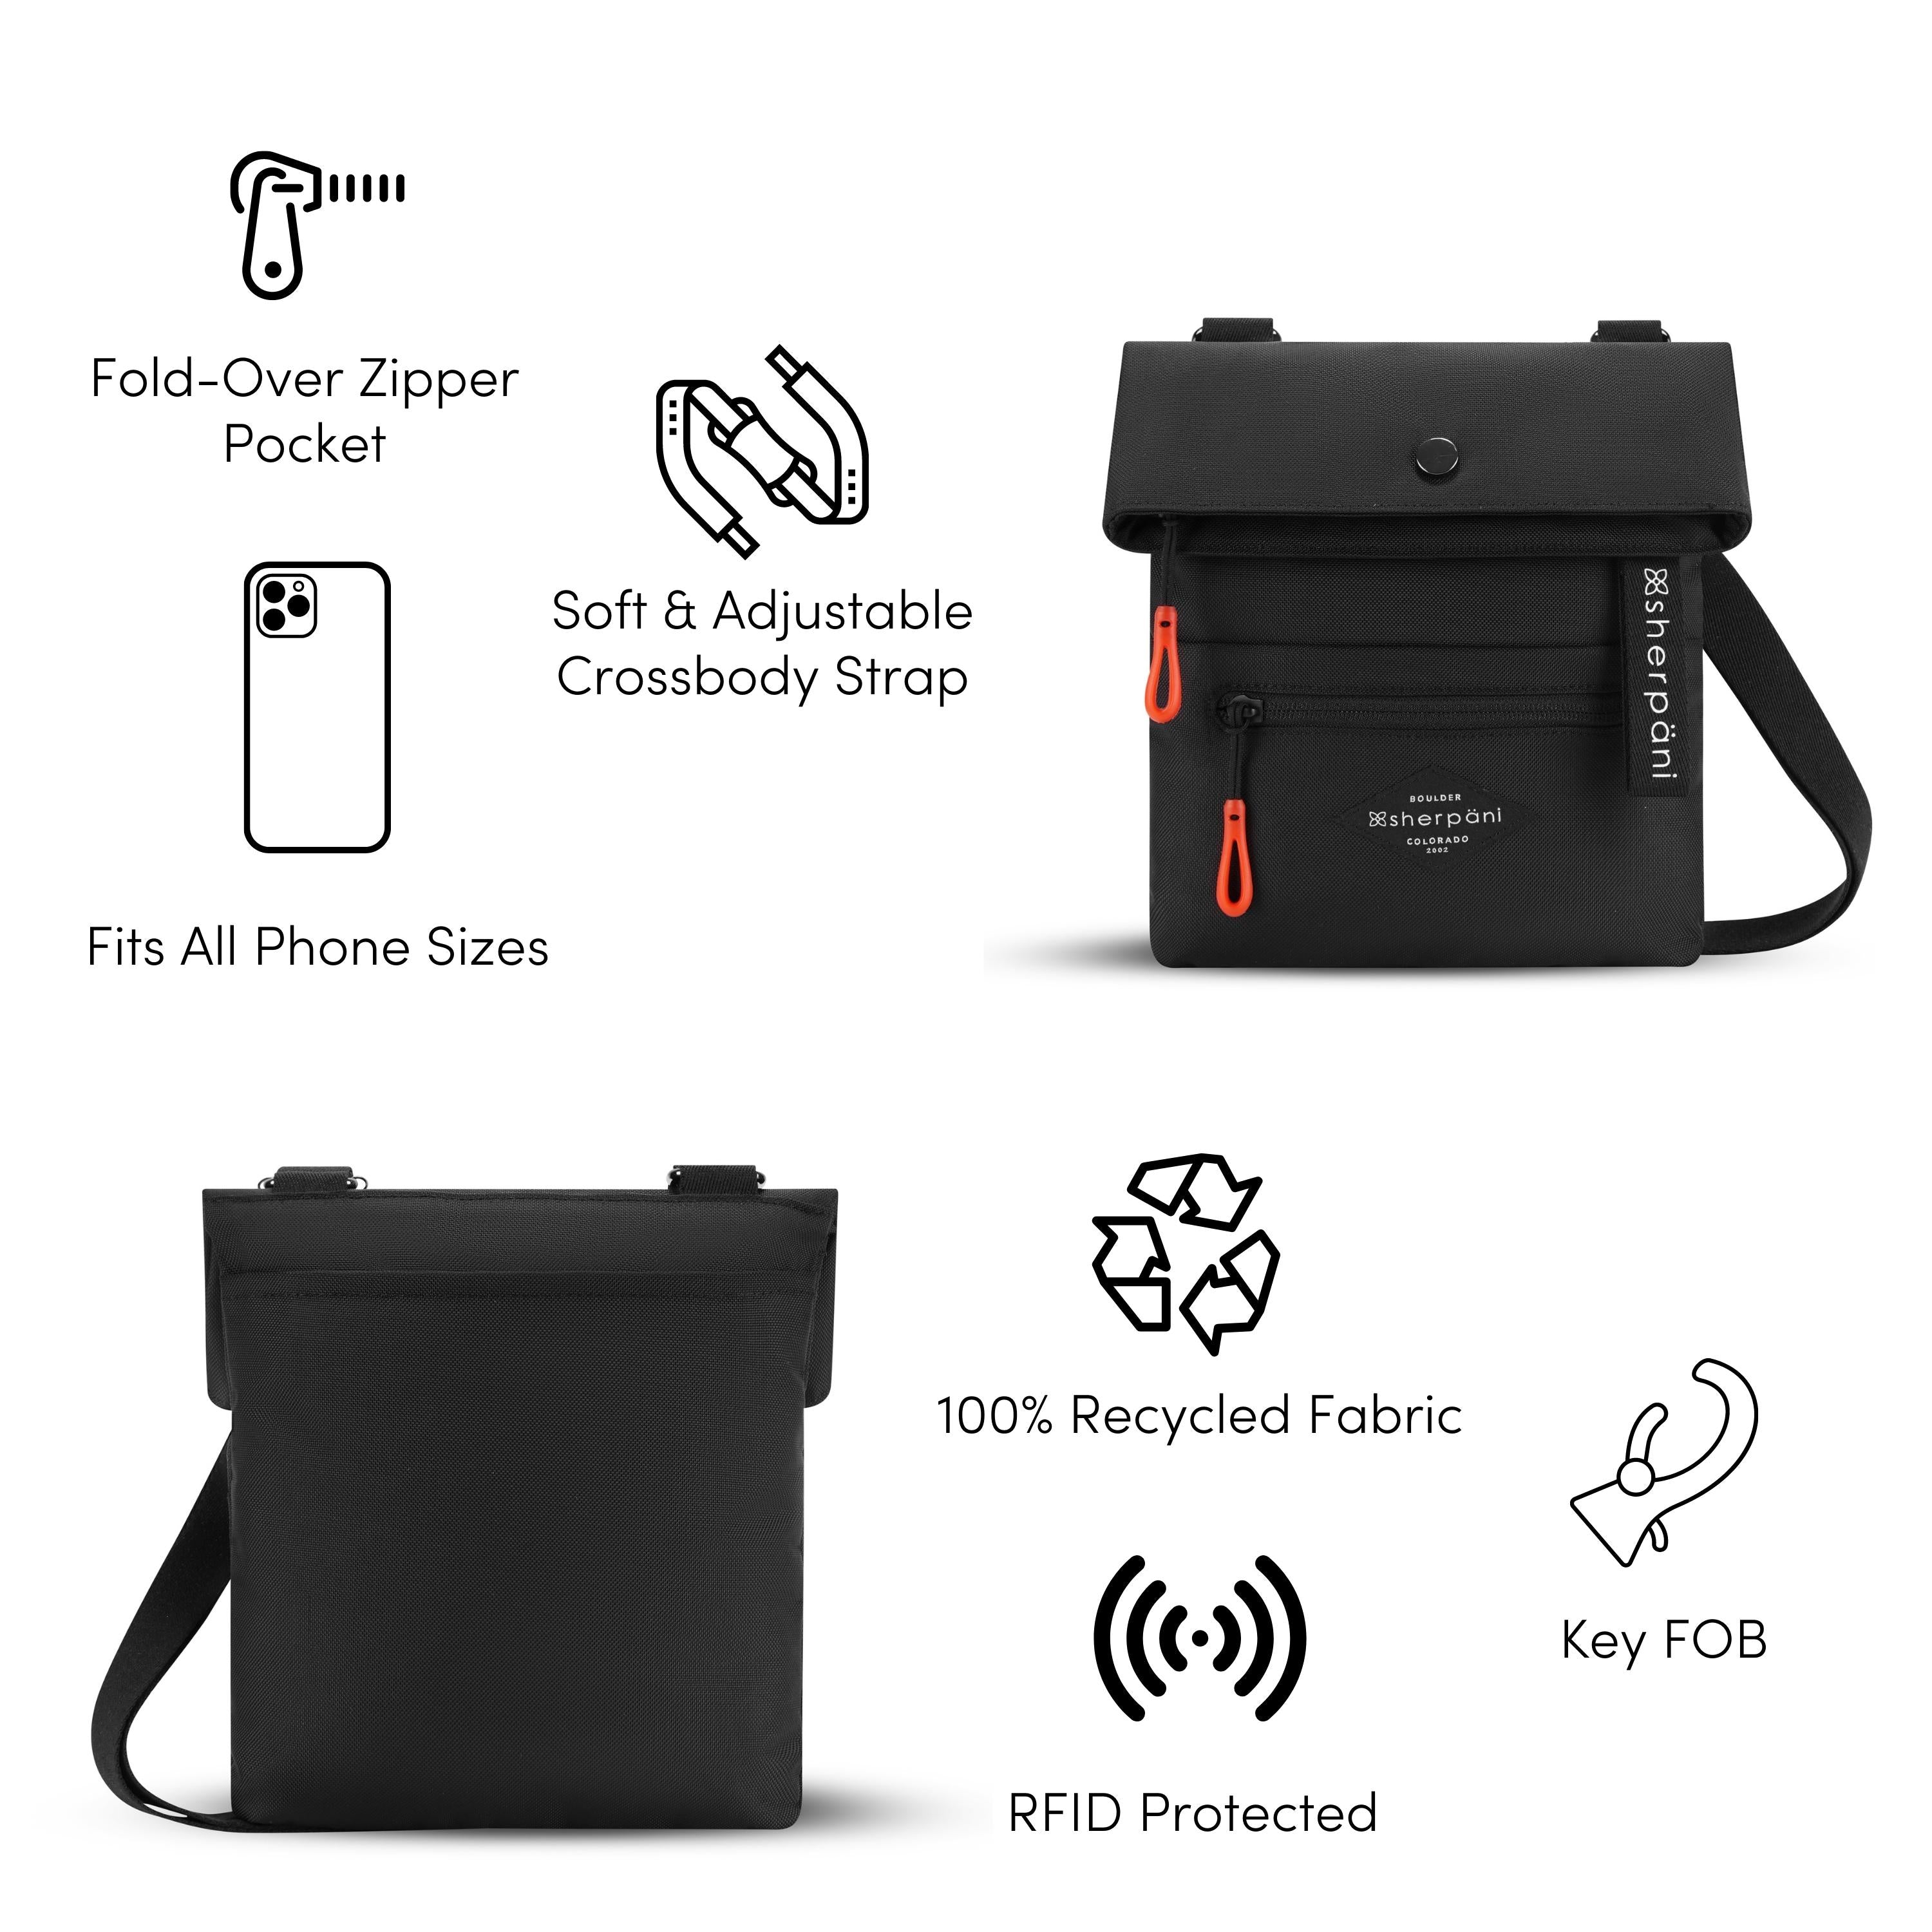 A Graphic showing the features of Sherpani’s crossbody, the Pica. There is a front and back view of the bag. The following features are highlighted with corresponding graphics: Fold Over Zipper Pocket, Soft & Adjustable Crossbody Strap, Fits All Phone Sizes, 100% Recycled Fabric, RFID Protected, Key FOB. 